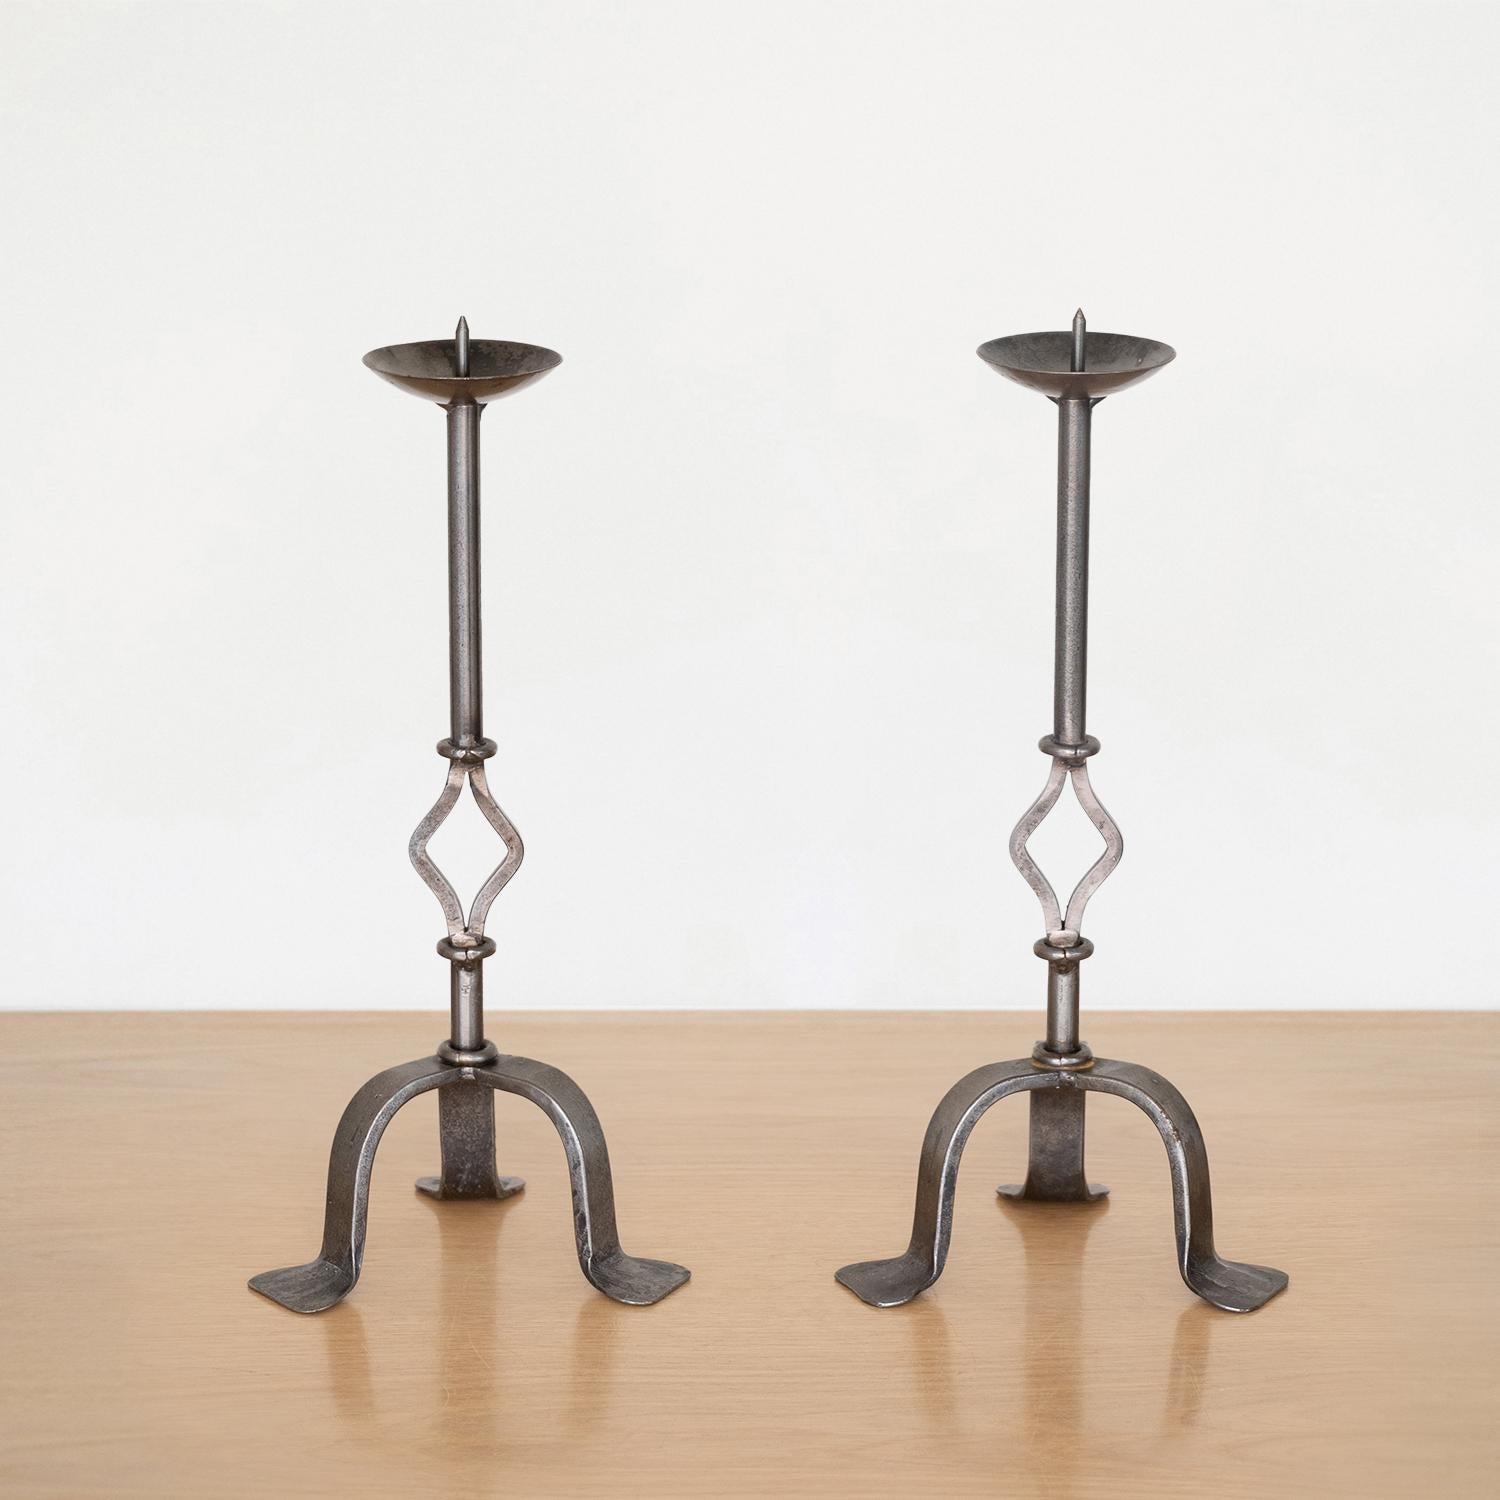 Great pair of decorative iron candlesticks from France. Single stems with ornate detailing and tripod base. Original light metal finish with some age and wear. Sold as a pair.